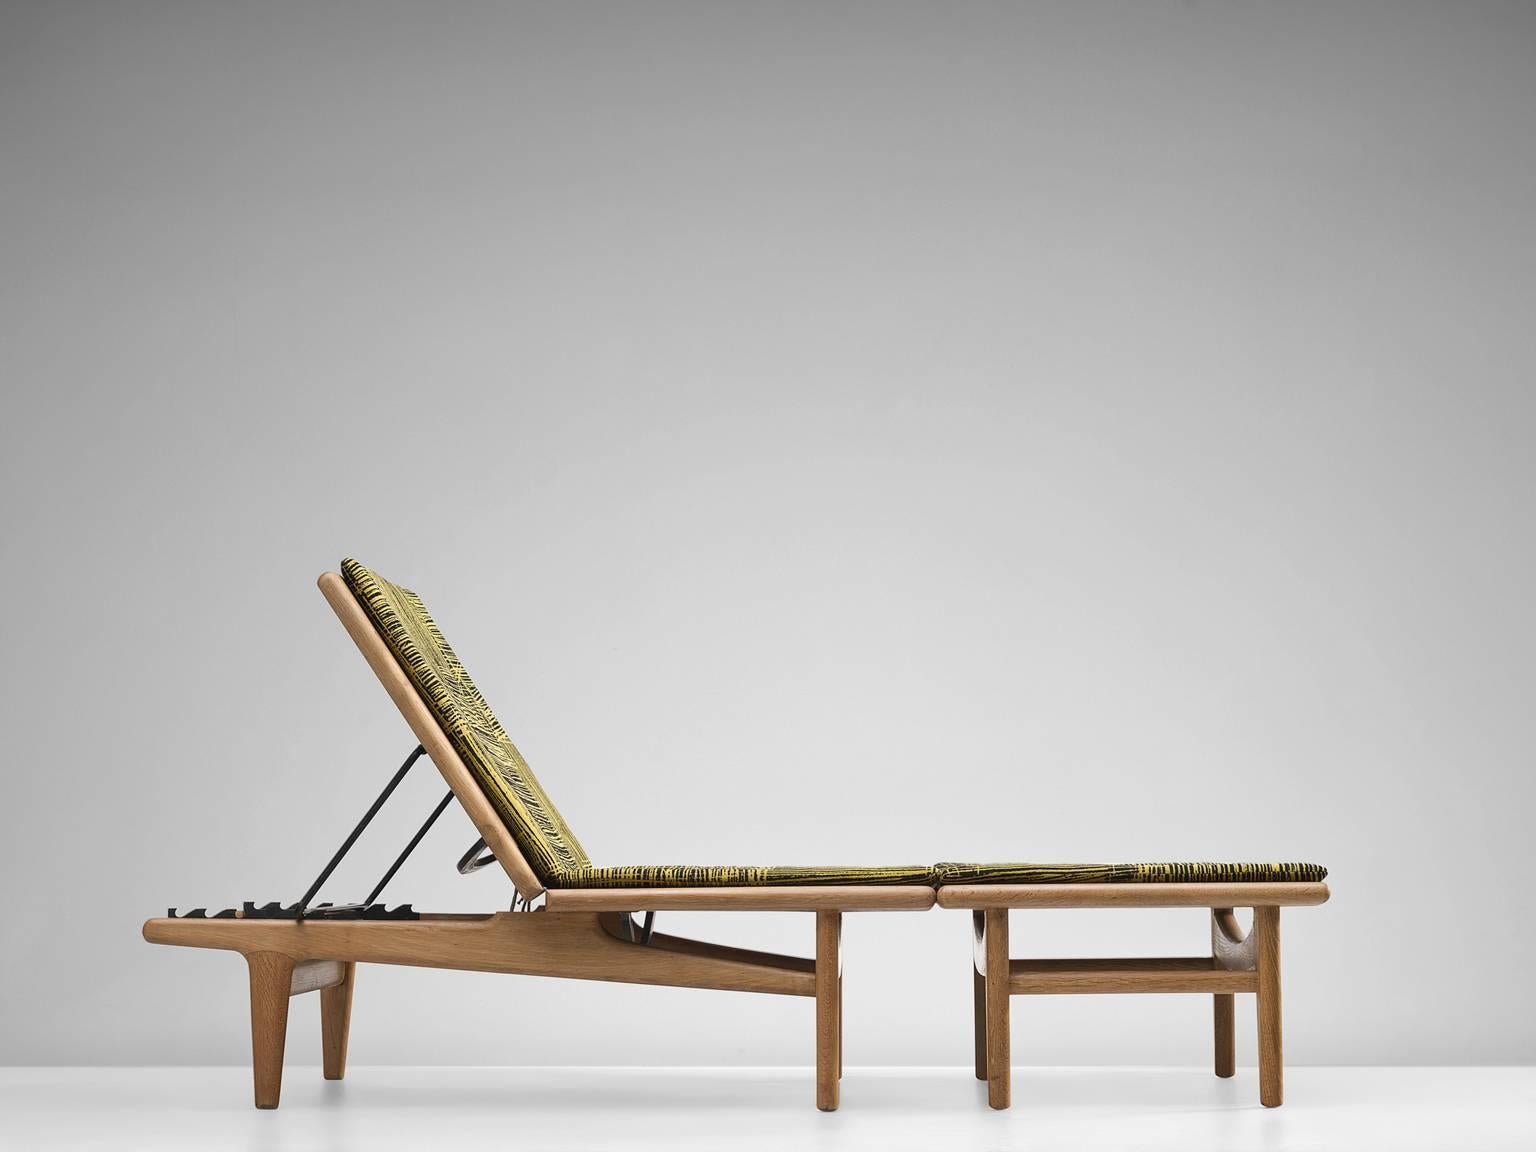 Chaise Longue with ottoman GE01, in oak, metal and fabric, by Hans J. Wegner for Getama, Denmark, 1954. 

The chaise consists out of two sections. An adjustable lounge chair and an ottoman which can be combined into a daybed. This daybed is a